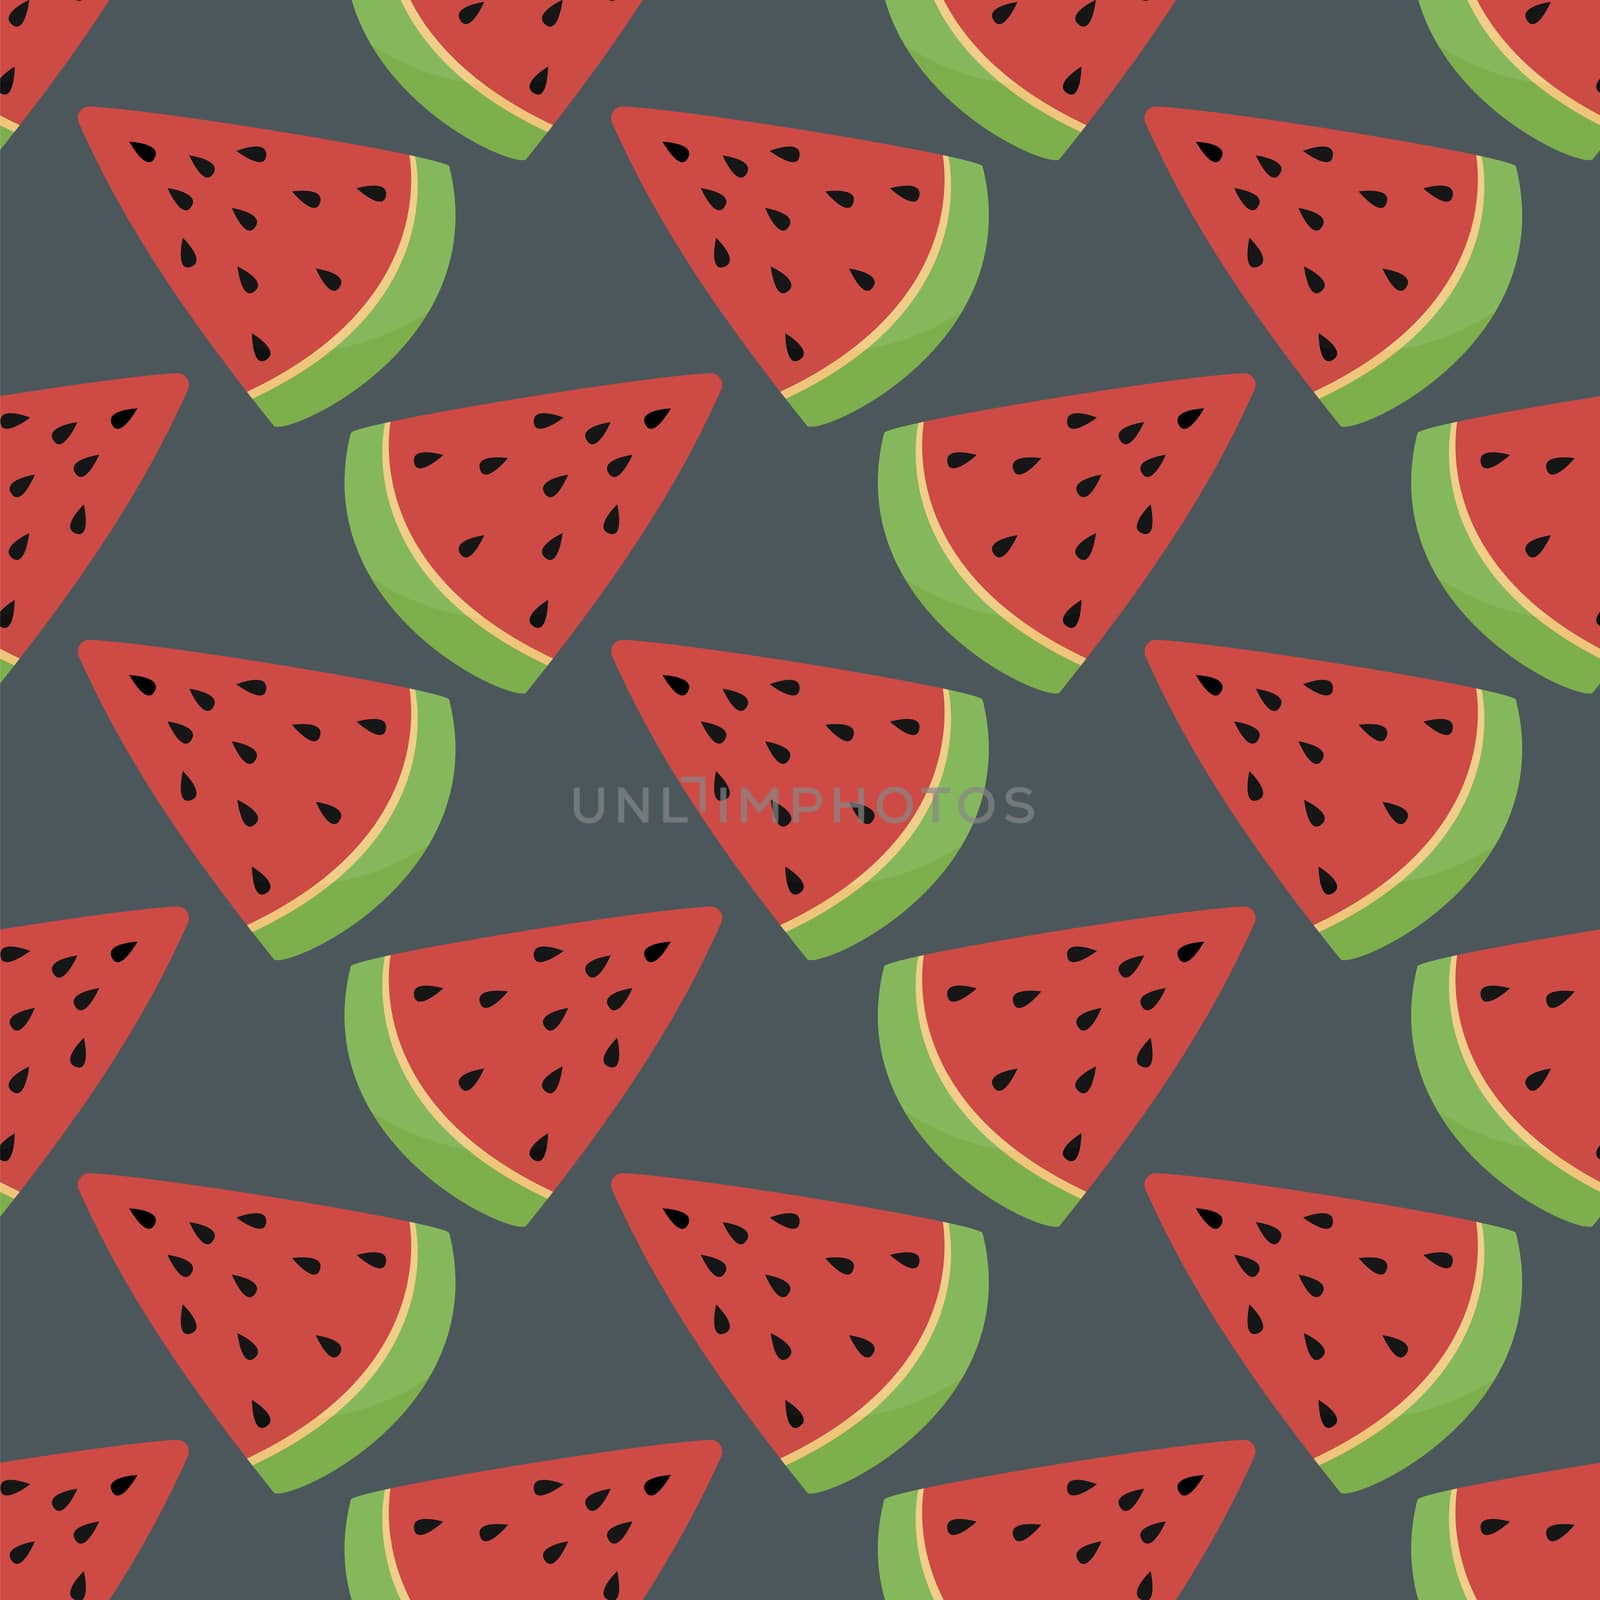 Watermelon slices pattern , illustration, vector on white background